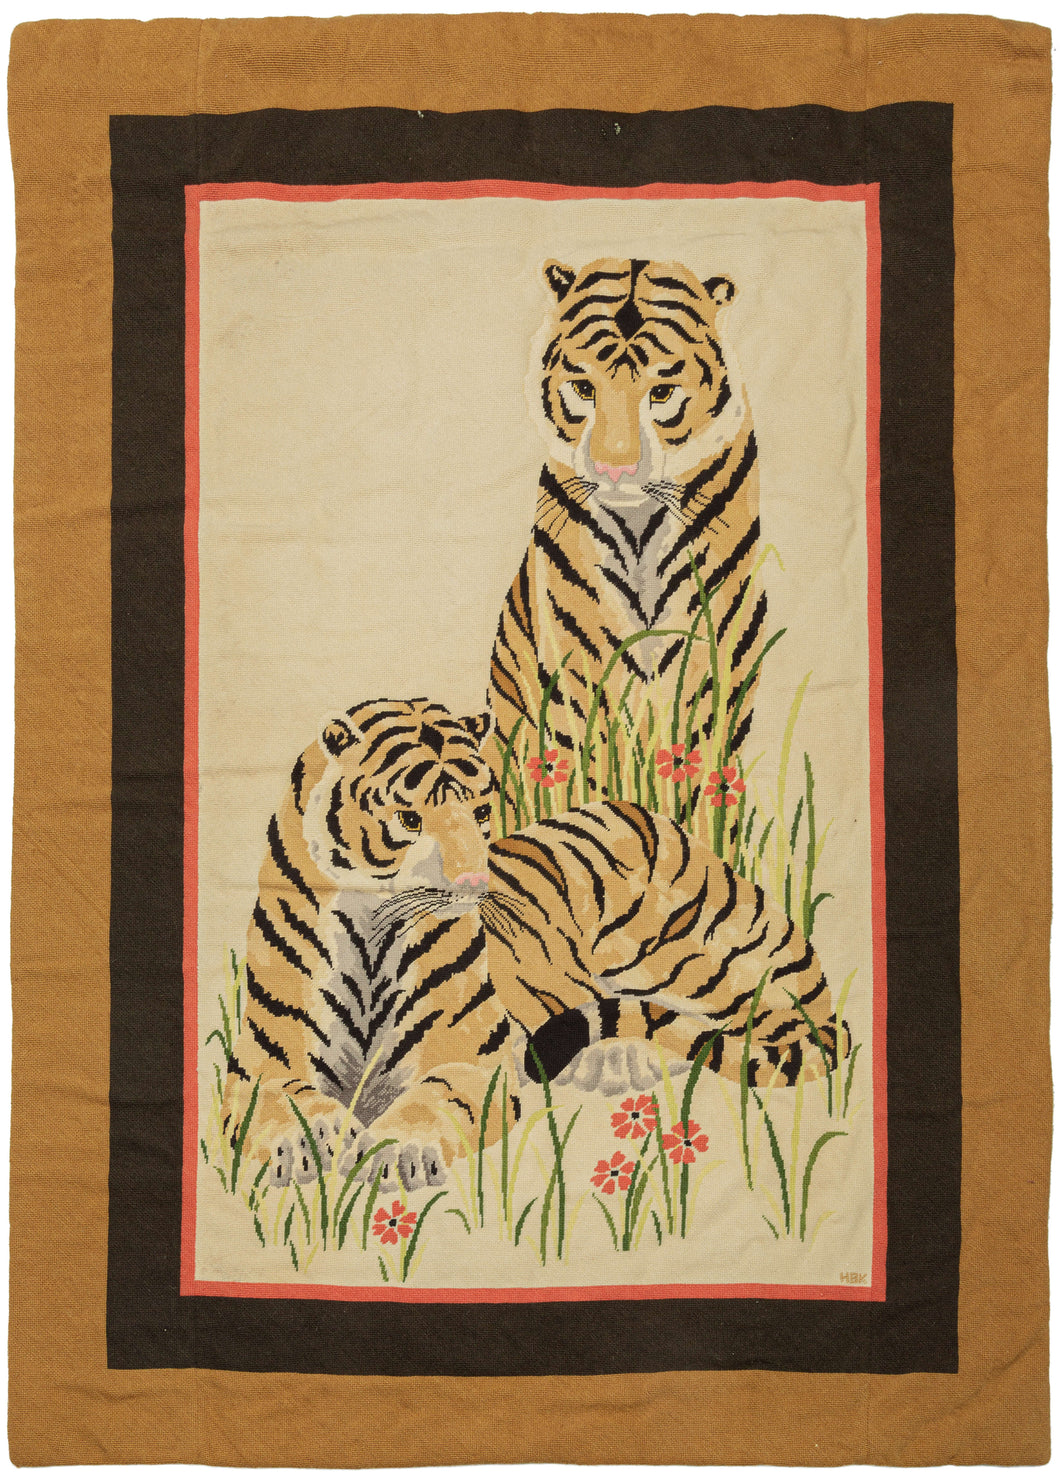 This Signed Tigers Needlepoint features a pair of tigers lounging amongst tall grass and wildflowers. It is simple and straightforward yet still striking in its warmth and beauty. The tigers are impeccably executed and stand out against the open cream backdrop and are perfectly framed by three increasingly wider bands of red, black, and copper. The intitials 